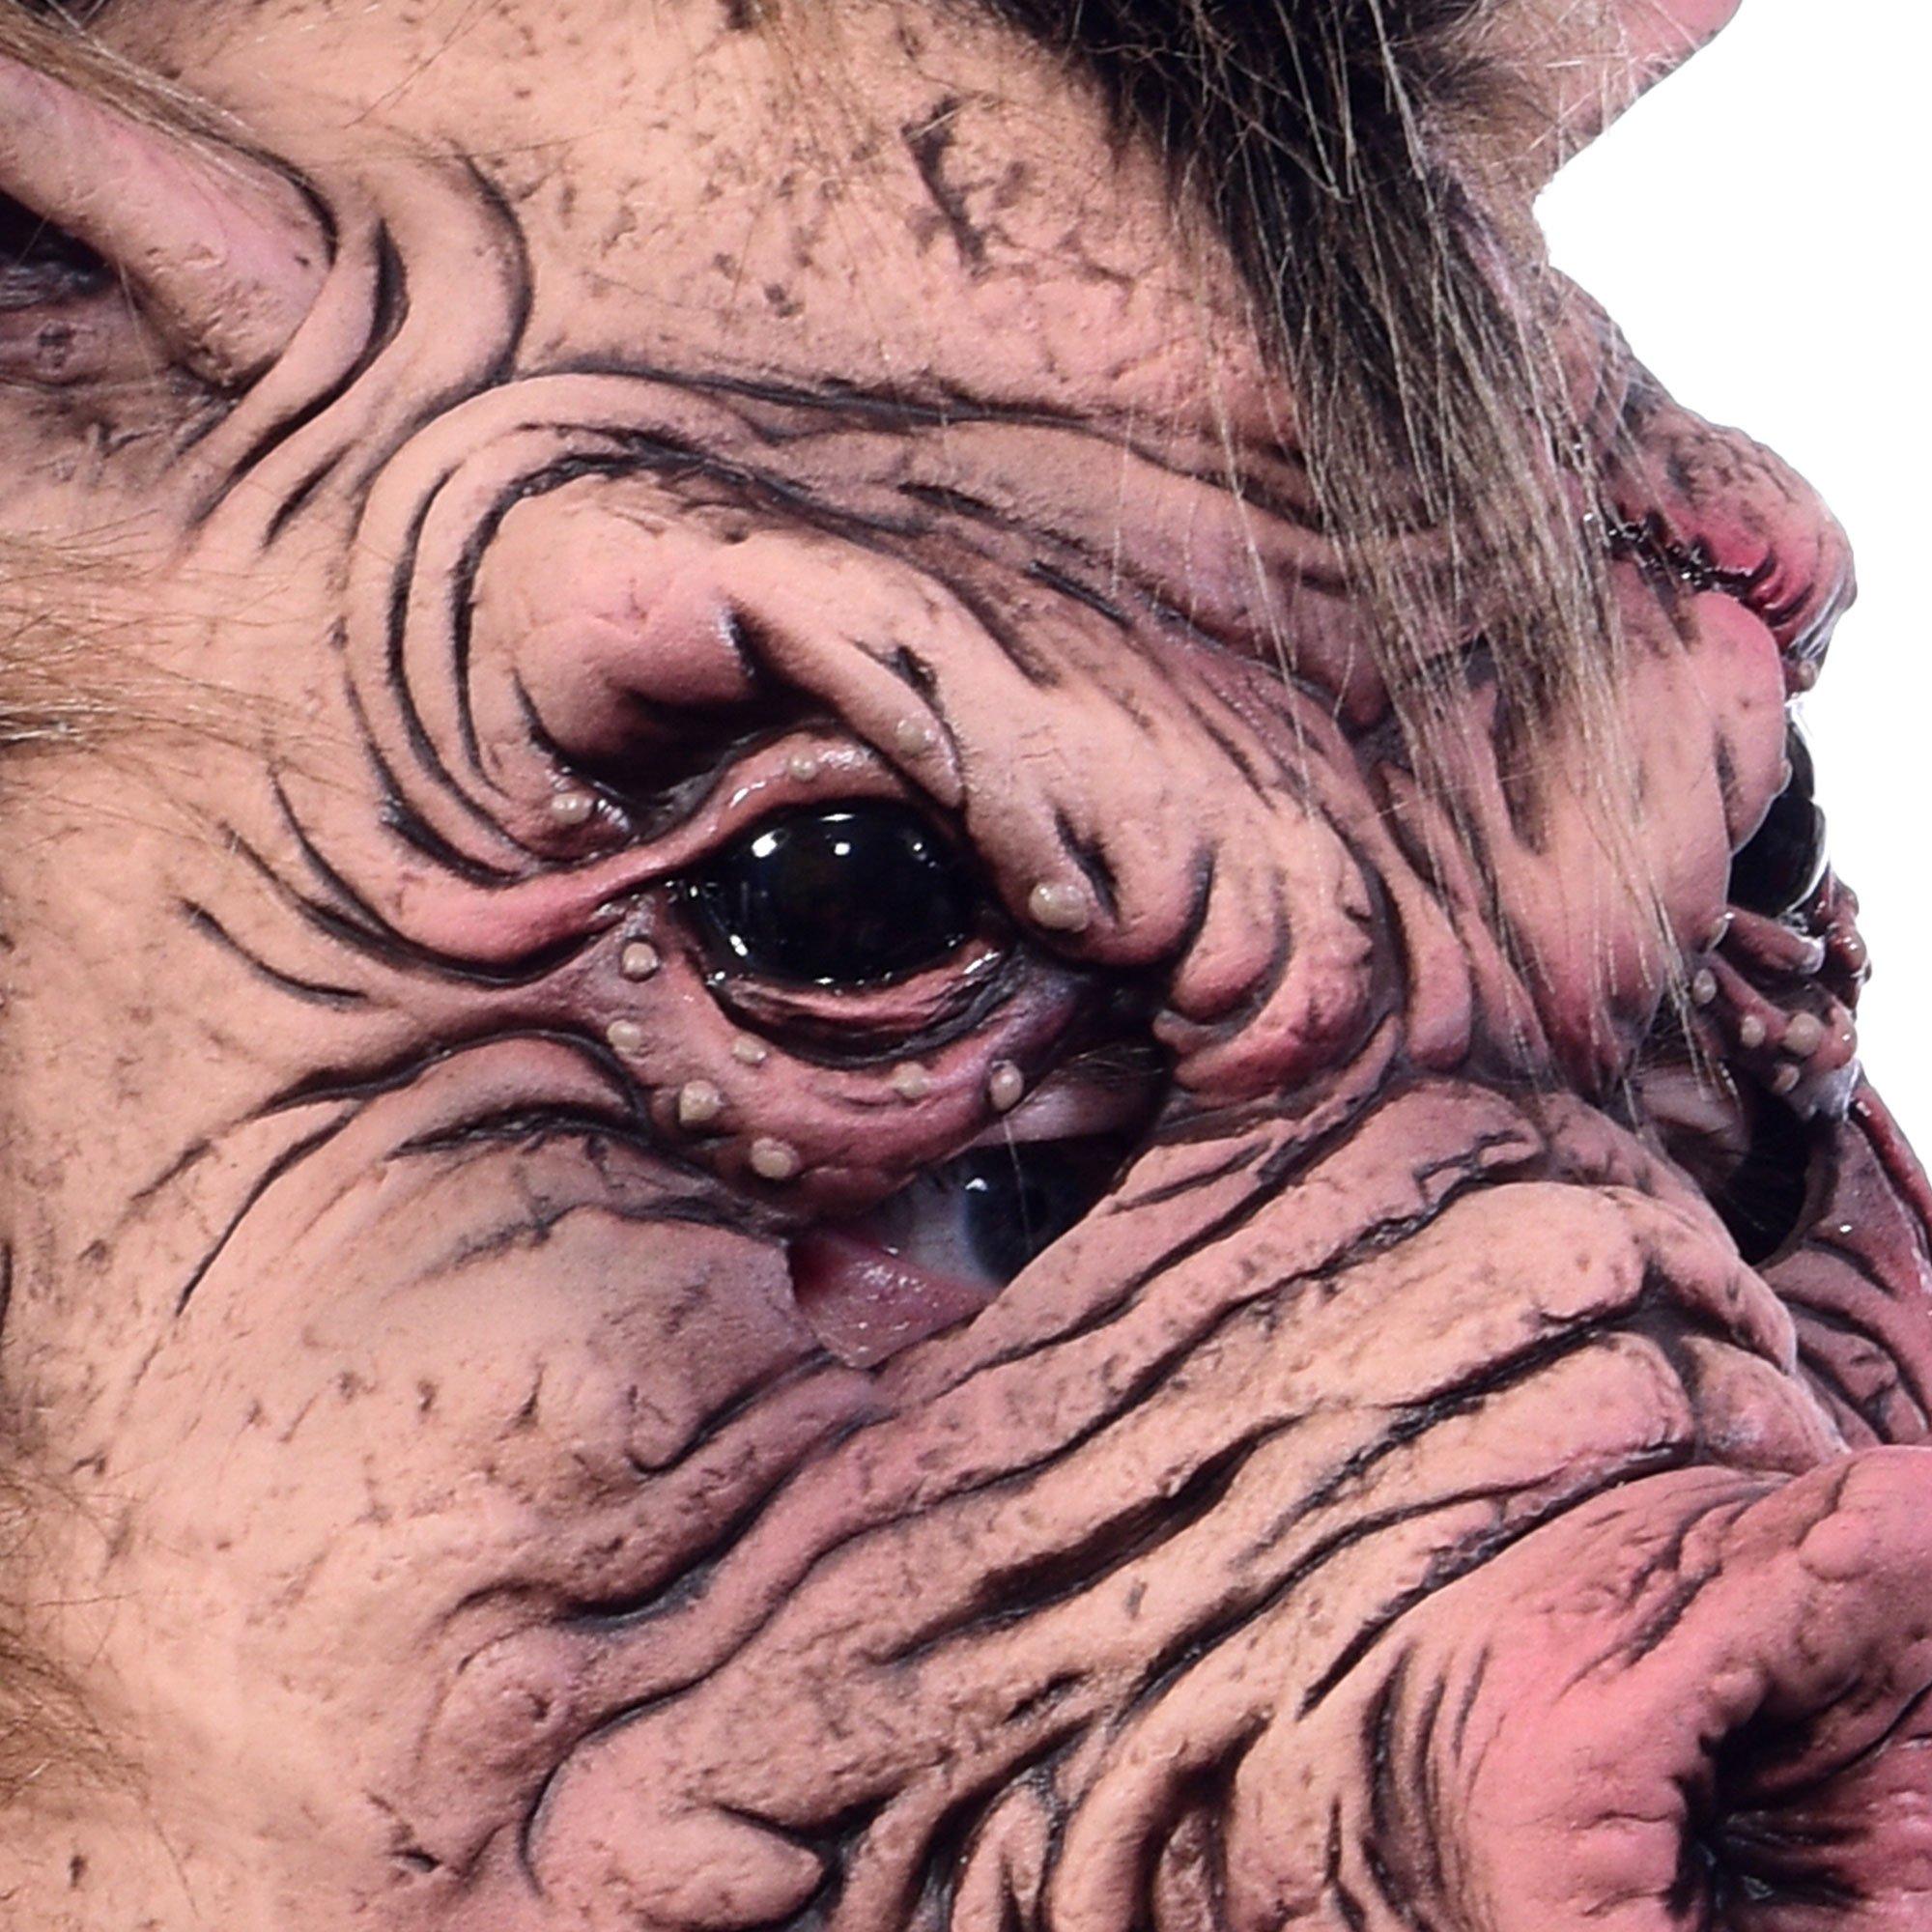 Adult Snort What a Boar Latex Face Mask - Zagone Studios